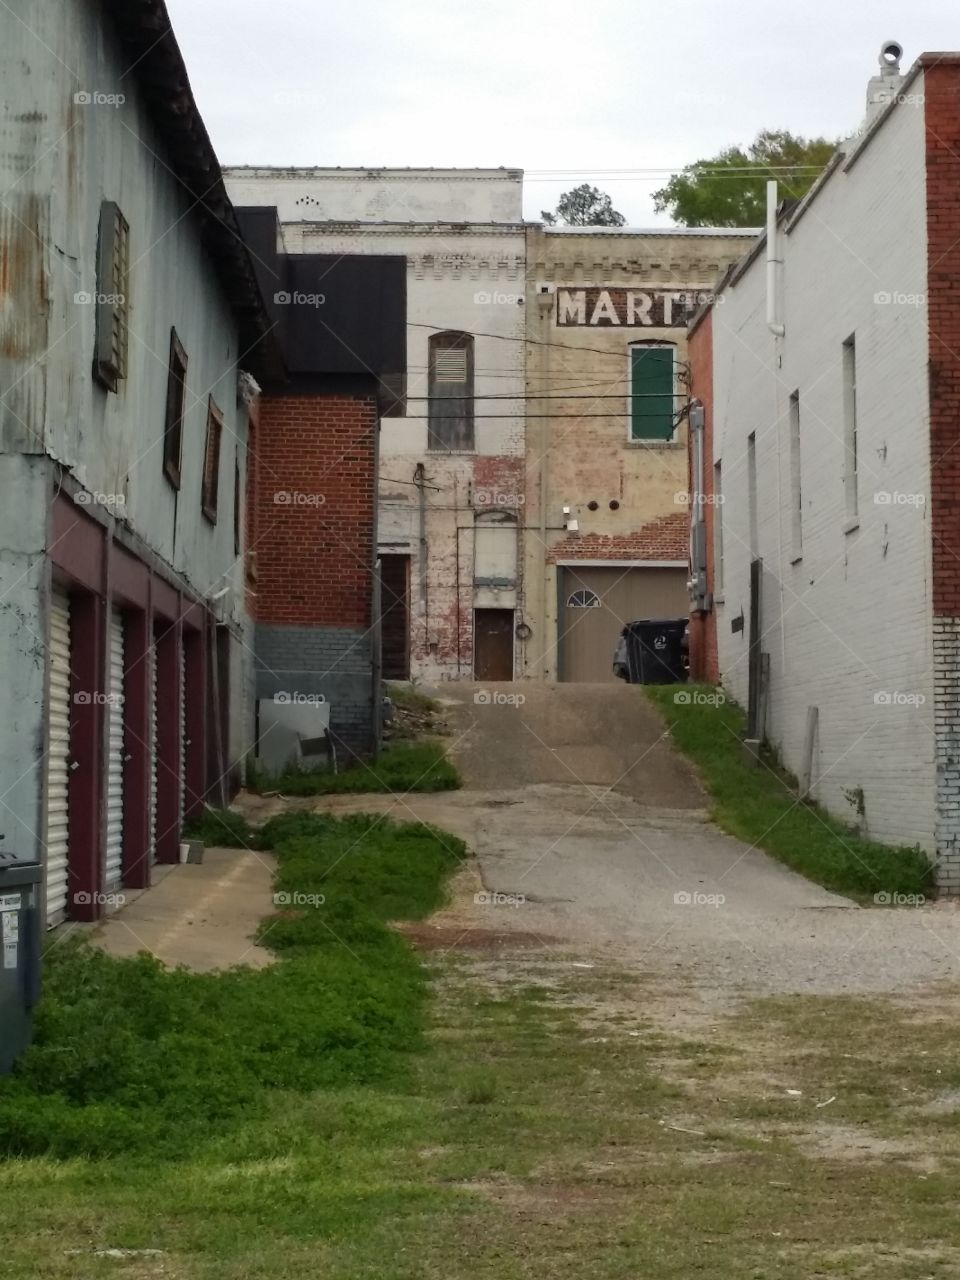 Small town Alabama alleyway. 